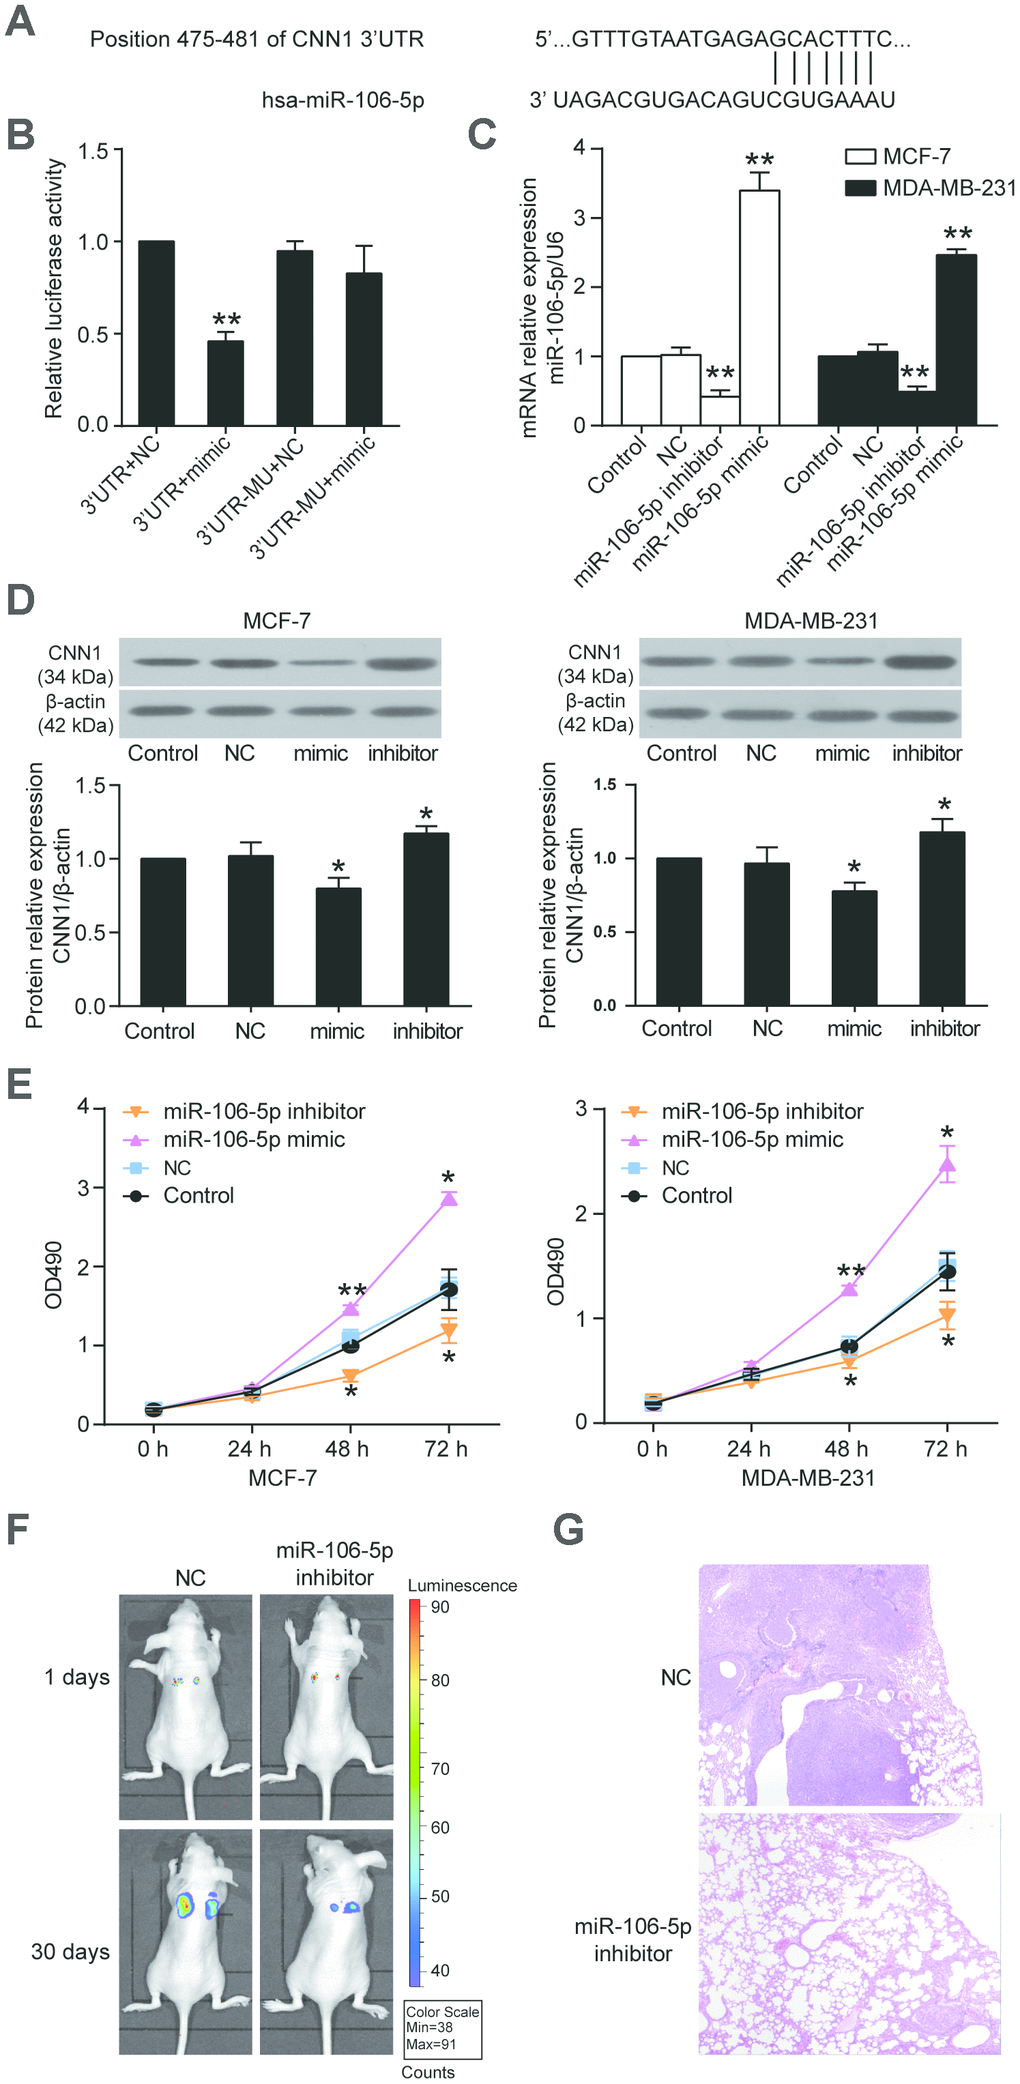 CNN1 was the target gene of miR-106b-5p, and the miR-106b-5p promoted cell proliferation. (A) The CNN1 3’UTR contained a binding site of miR-106b-5p by miRDB prediction. (B) The dual-luciferase reporter assay revealed the interaction between CNN1 3’UTR and miR-106b-5p. The HEK293 cells were co-transfected with the miR-106b-5p mimic and CNN1, or miR-106b-5p mimic and mutated CNN1. 3’UTR, wild-type CNN1 containing 3’UTR binding site. mimic, miR-106b-5p mimic. MU, mutated CNN1 without the 3’UTR binding site. NC, negative control. **PC) The qRT-PCR was performed to detect the transfection efficiency of miR-106b-5p mimic and inhibitor in MCF-7 and MDA-MB-231 cells. (D) The miR-106b-5p mimic successfully inhibited CNN1 expression, while the miR-106b-5p inhibitor successfully upregulated CNN1 expression. The CNN1 protein expression was examined by immunoblotting assay after upregulation or downregulation of miR-106b-5p. mimic, the cells were transfected with miR-106b-5p mimic. inhibitor, the cells were transfected with miR-106b-5p inhibitor. (E) The miR-106b-5p mimic enhanced cell proliferation, and the miR-106b-5p inhibitor suppressed cell proliferation. The CCK8 assay was performed to detect the cell proliferation after transfection of miR-106b-5p mimic or inhibitor for 0 h, 24 h, 48 h, and 72 h. *PF) Representative live bioluminescence images from mice treated with MCF-7 cells transfected with negative control or miR-106b-5p inhibitor. (G) Representative hematoxylin and eosin (H&E)-stained lung sections from mice treated with MCF-7 cells transfected with negative control or miR-106b-5p inhibitor.